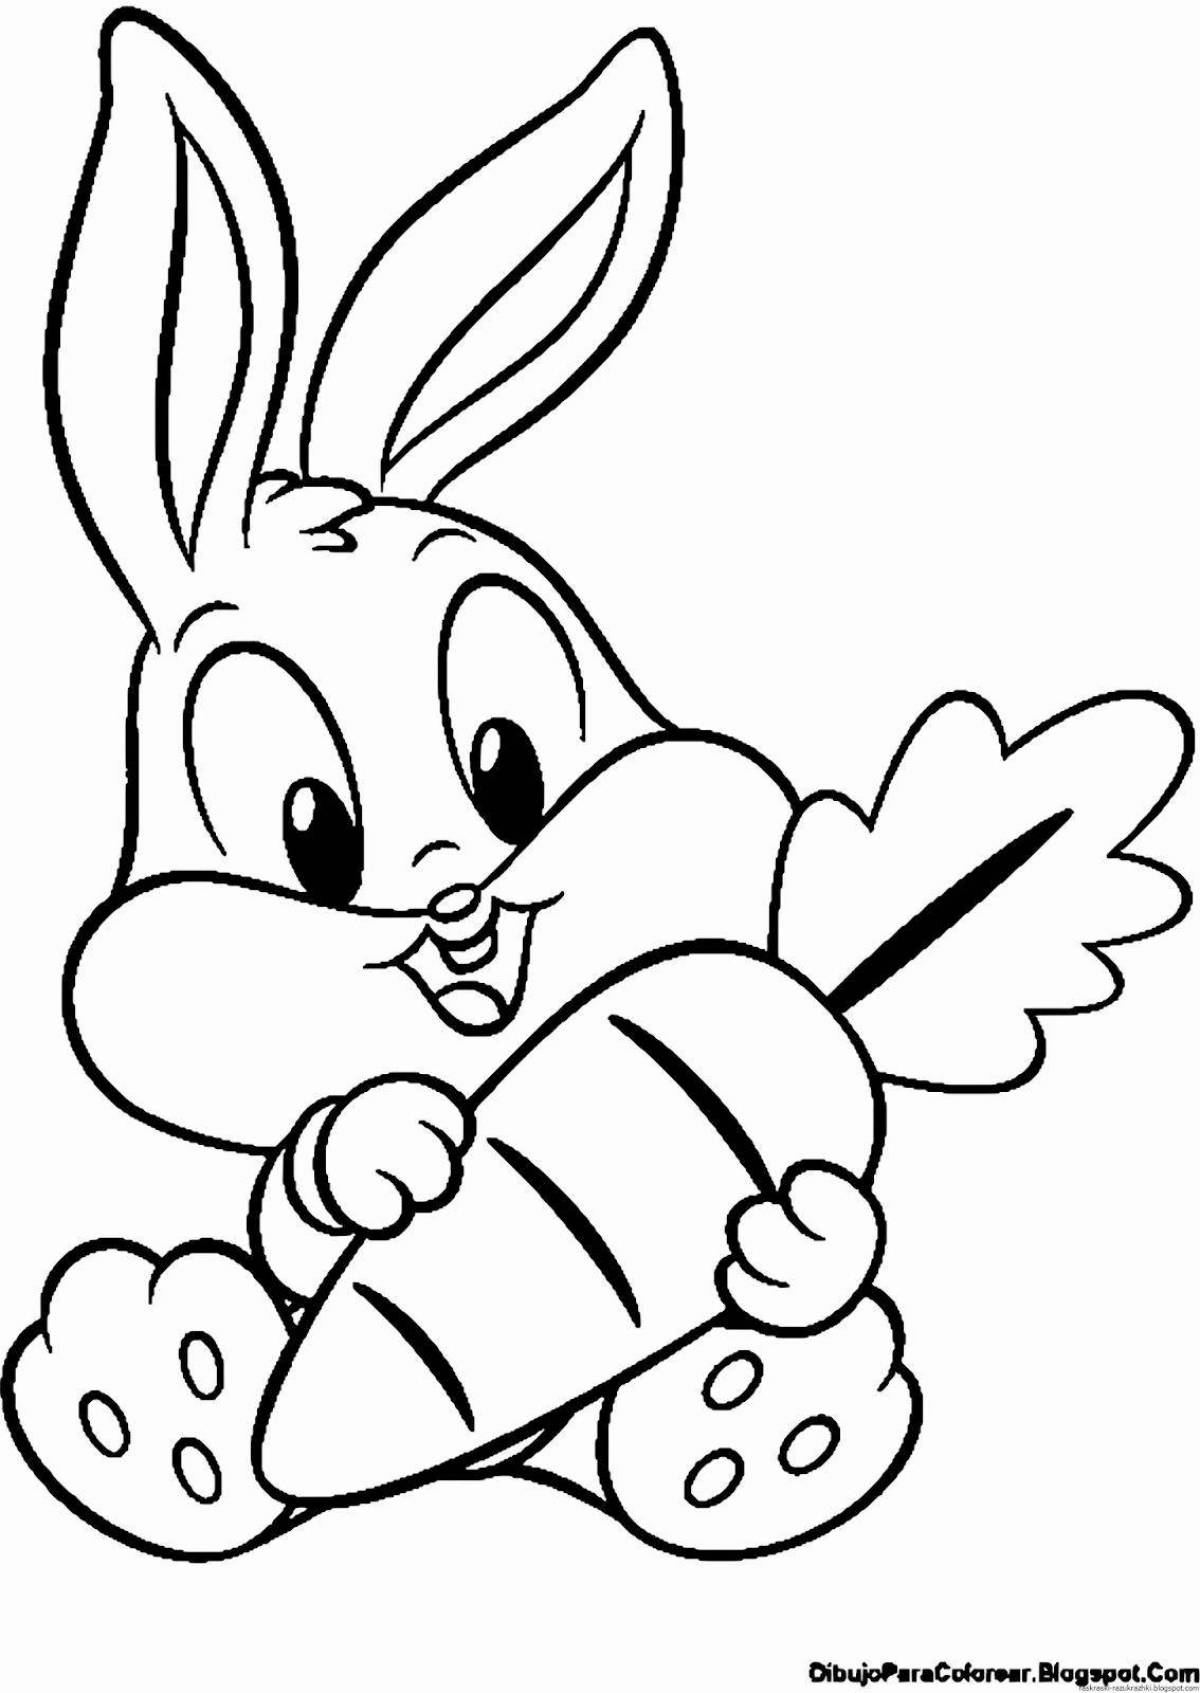 Coloring book funny cartoon hare